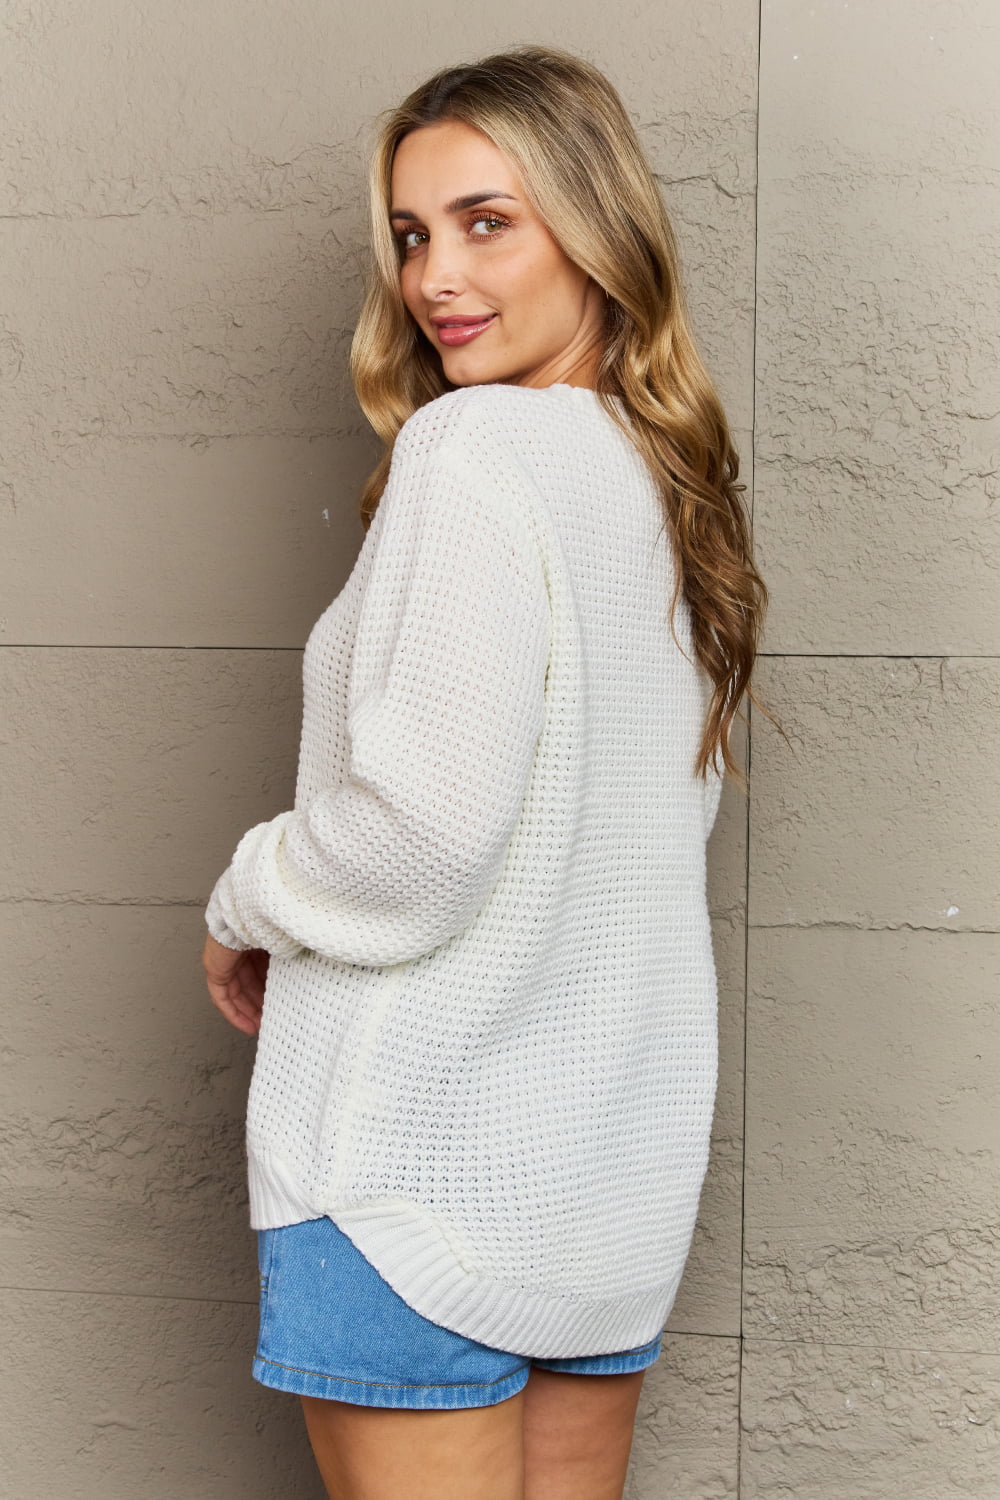 Zenana Cozy Season High Low Waffle Sweater Pullover in Ivory - Guy Christopher 